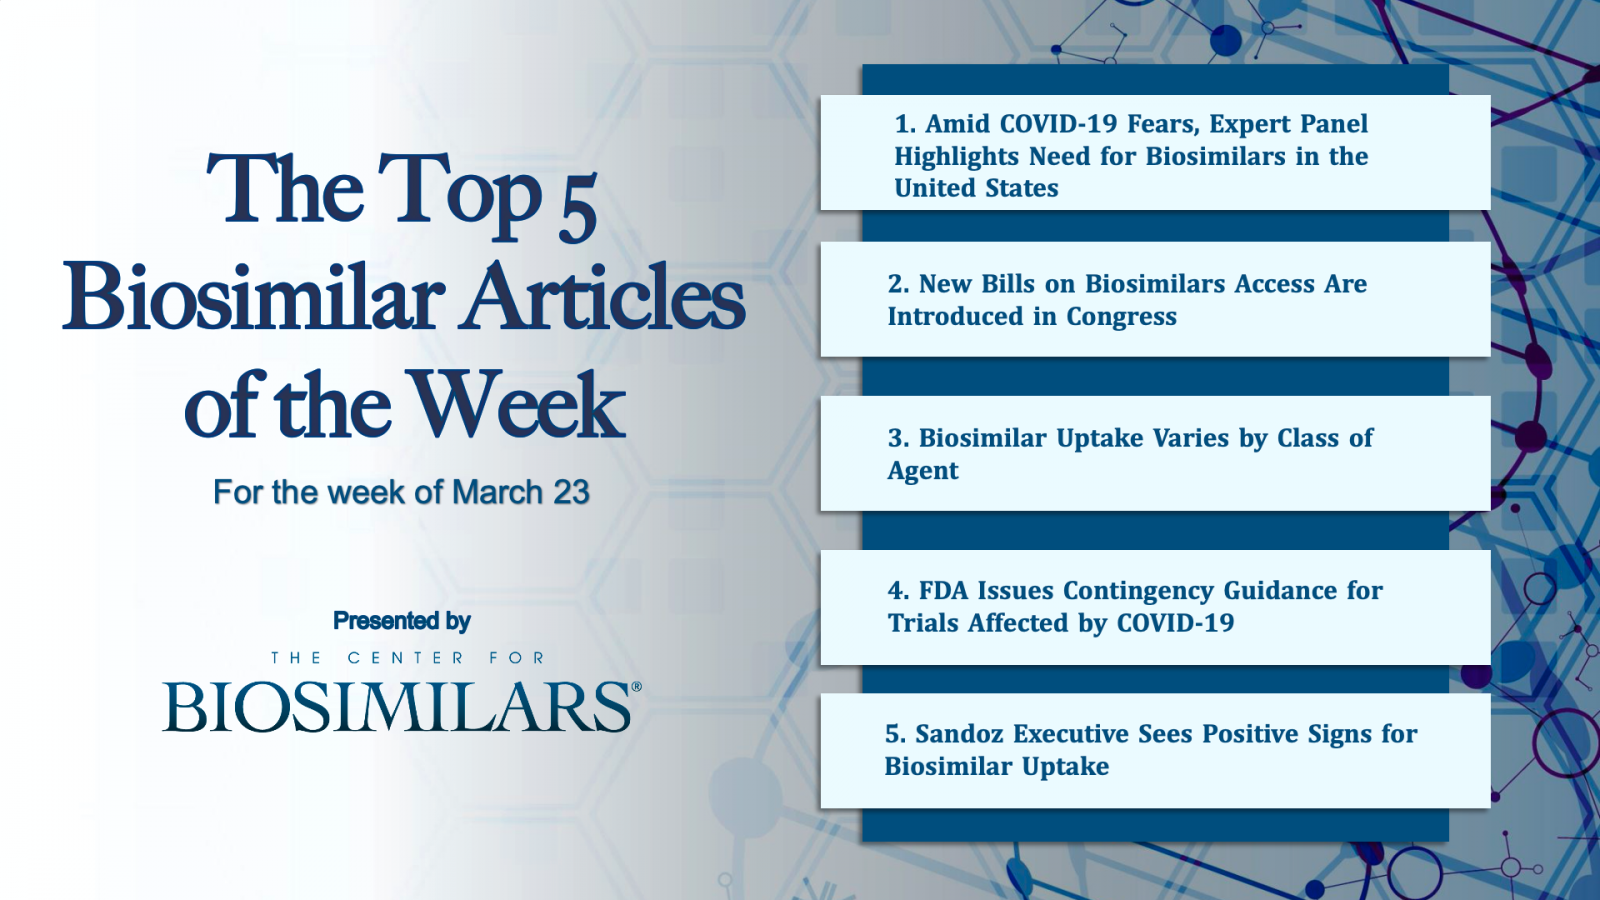 The Top 5 Biosimilars Articles for the Week of March 23